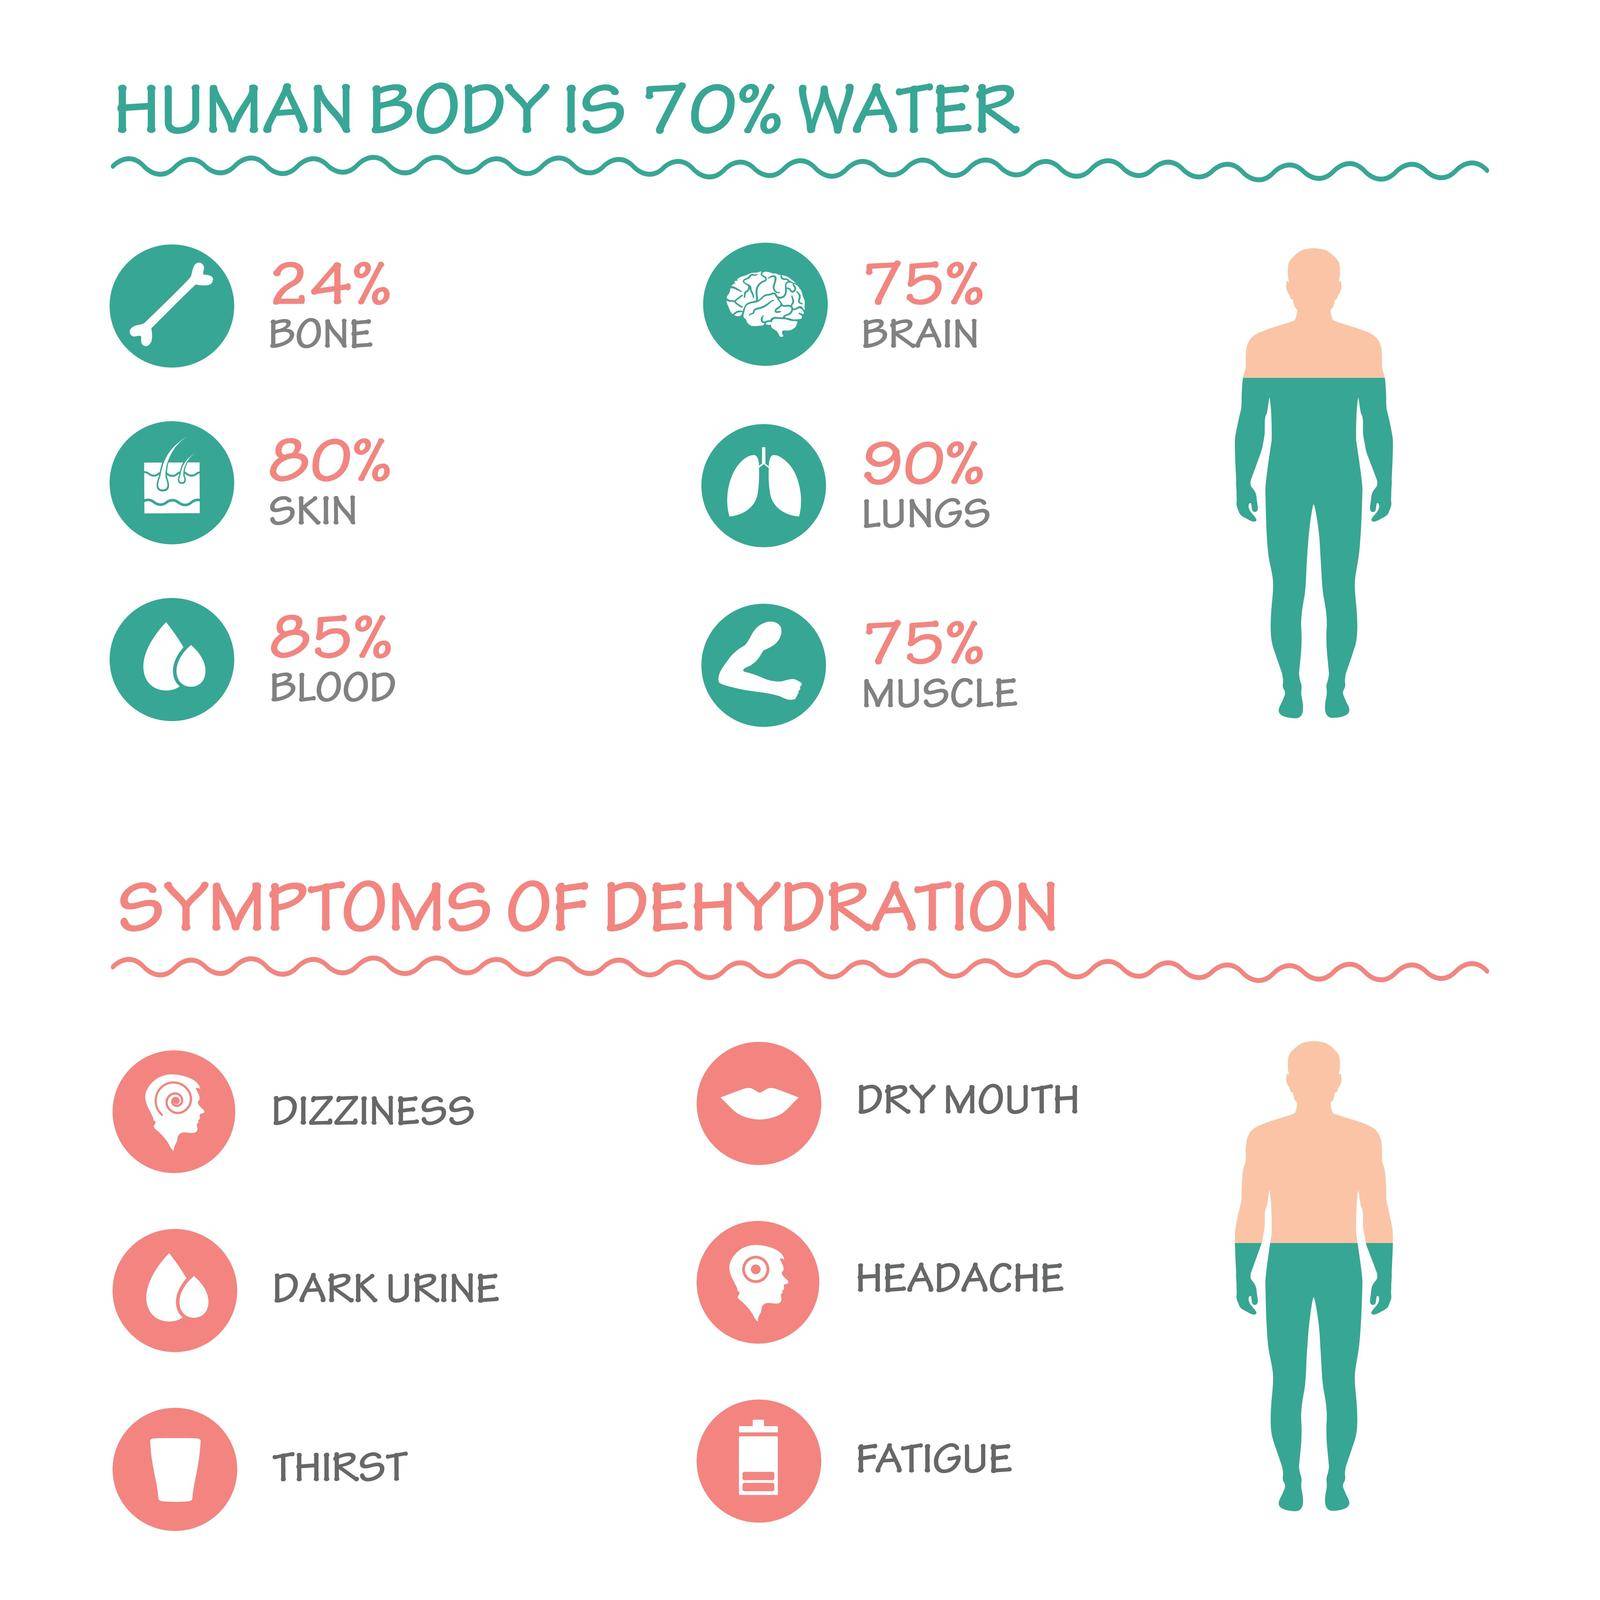 Dehydration symptoms infographic by eveleen